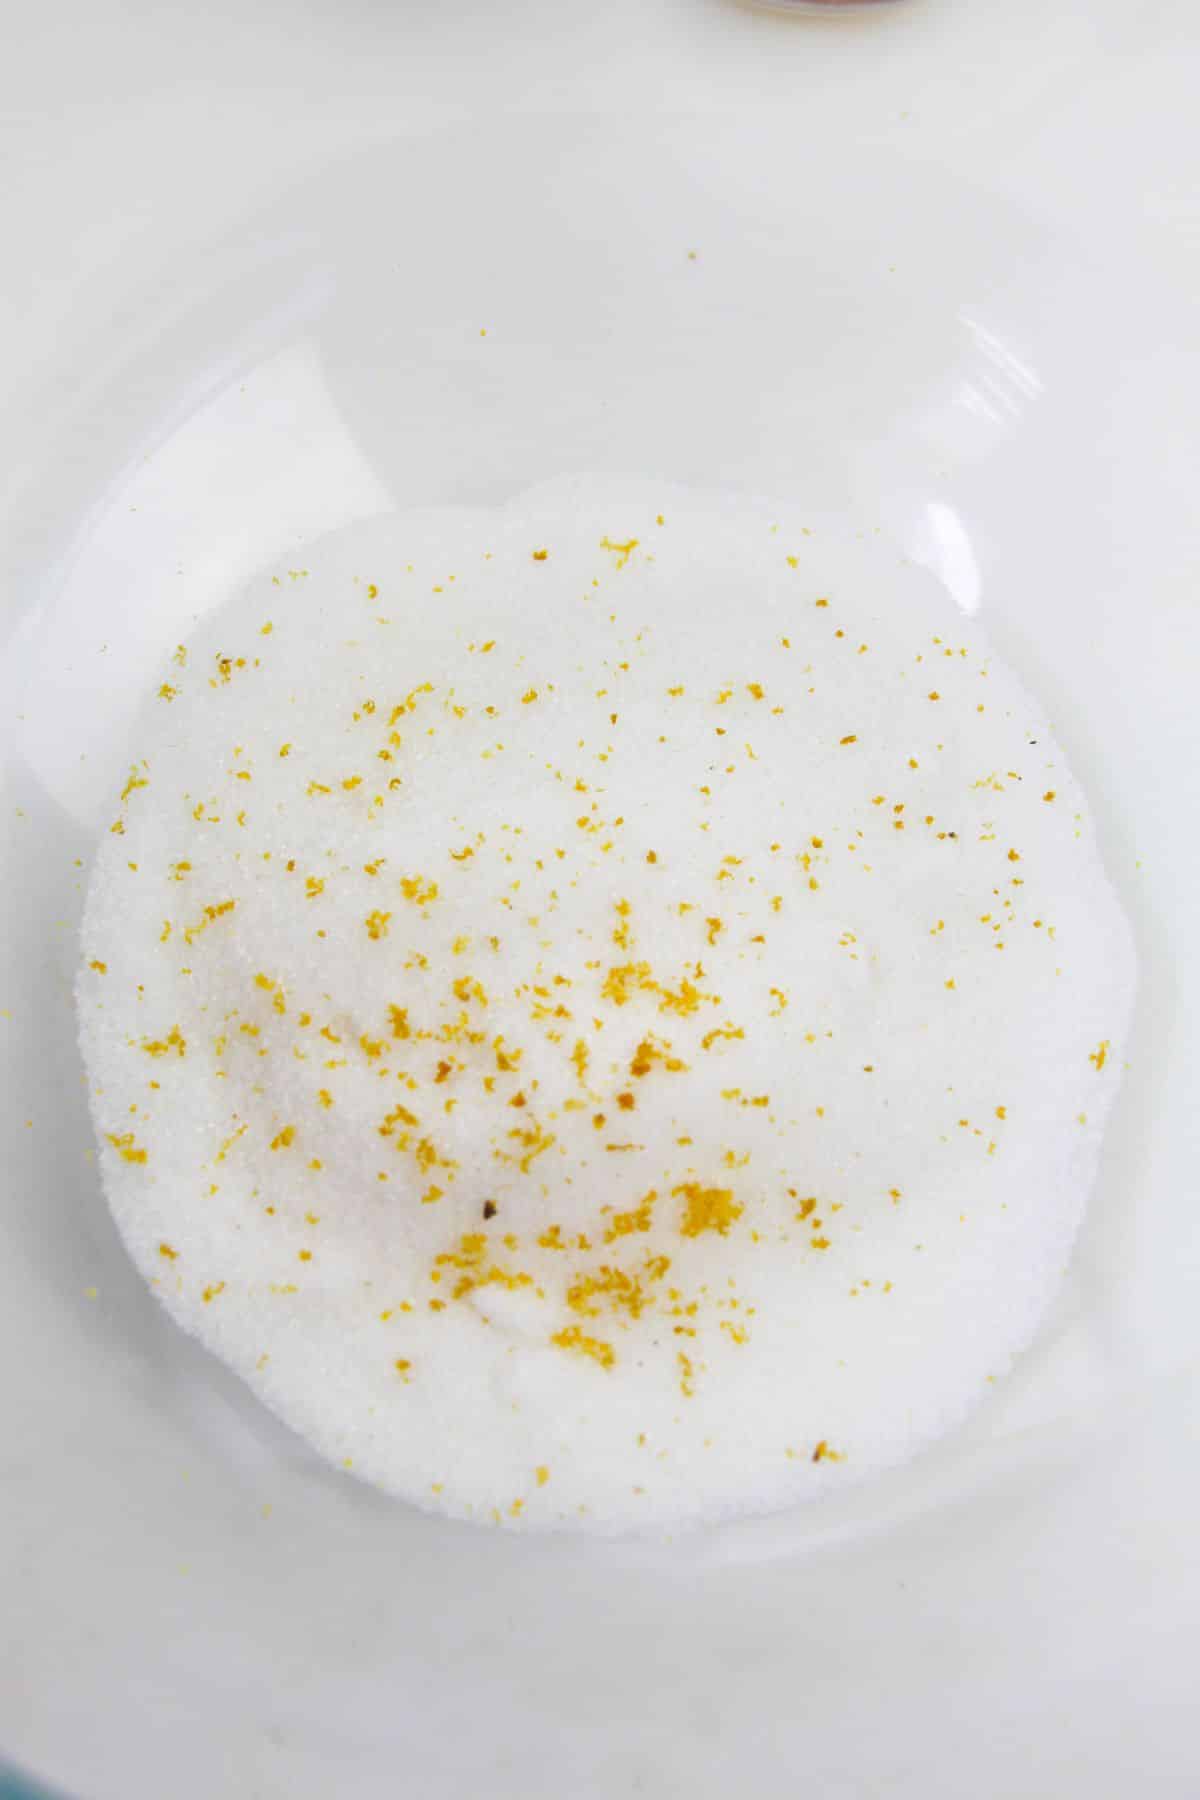 sugar and lemon in a small glass bowl